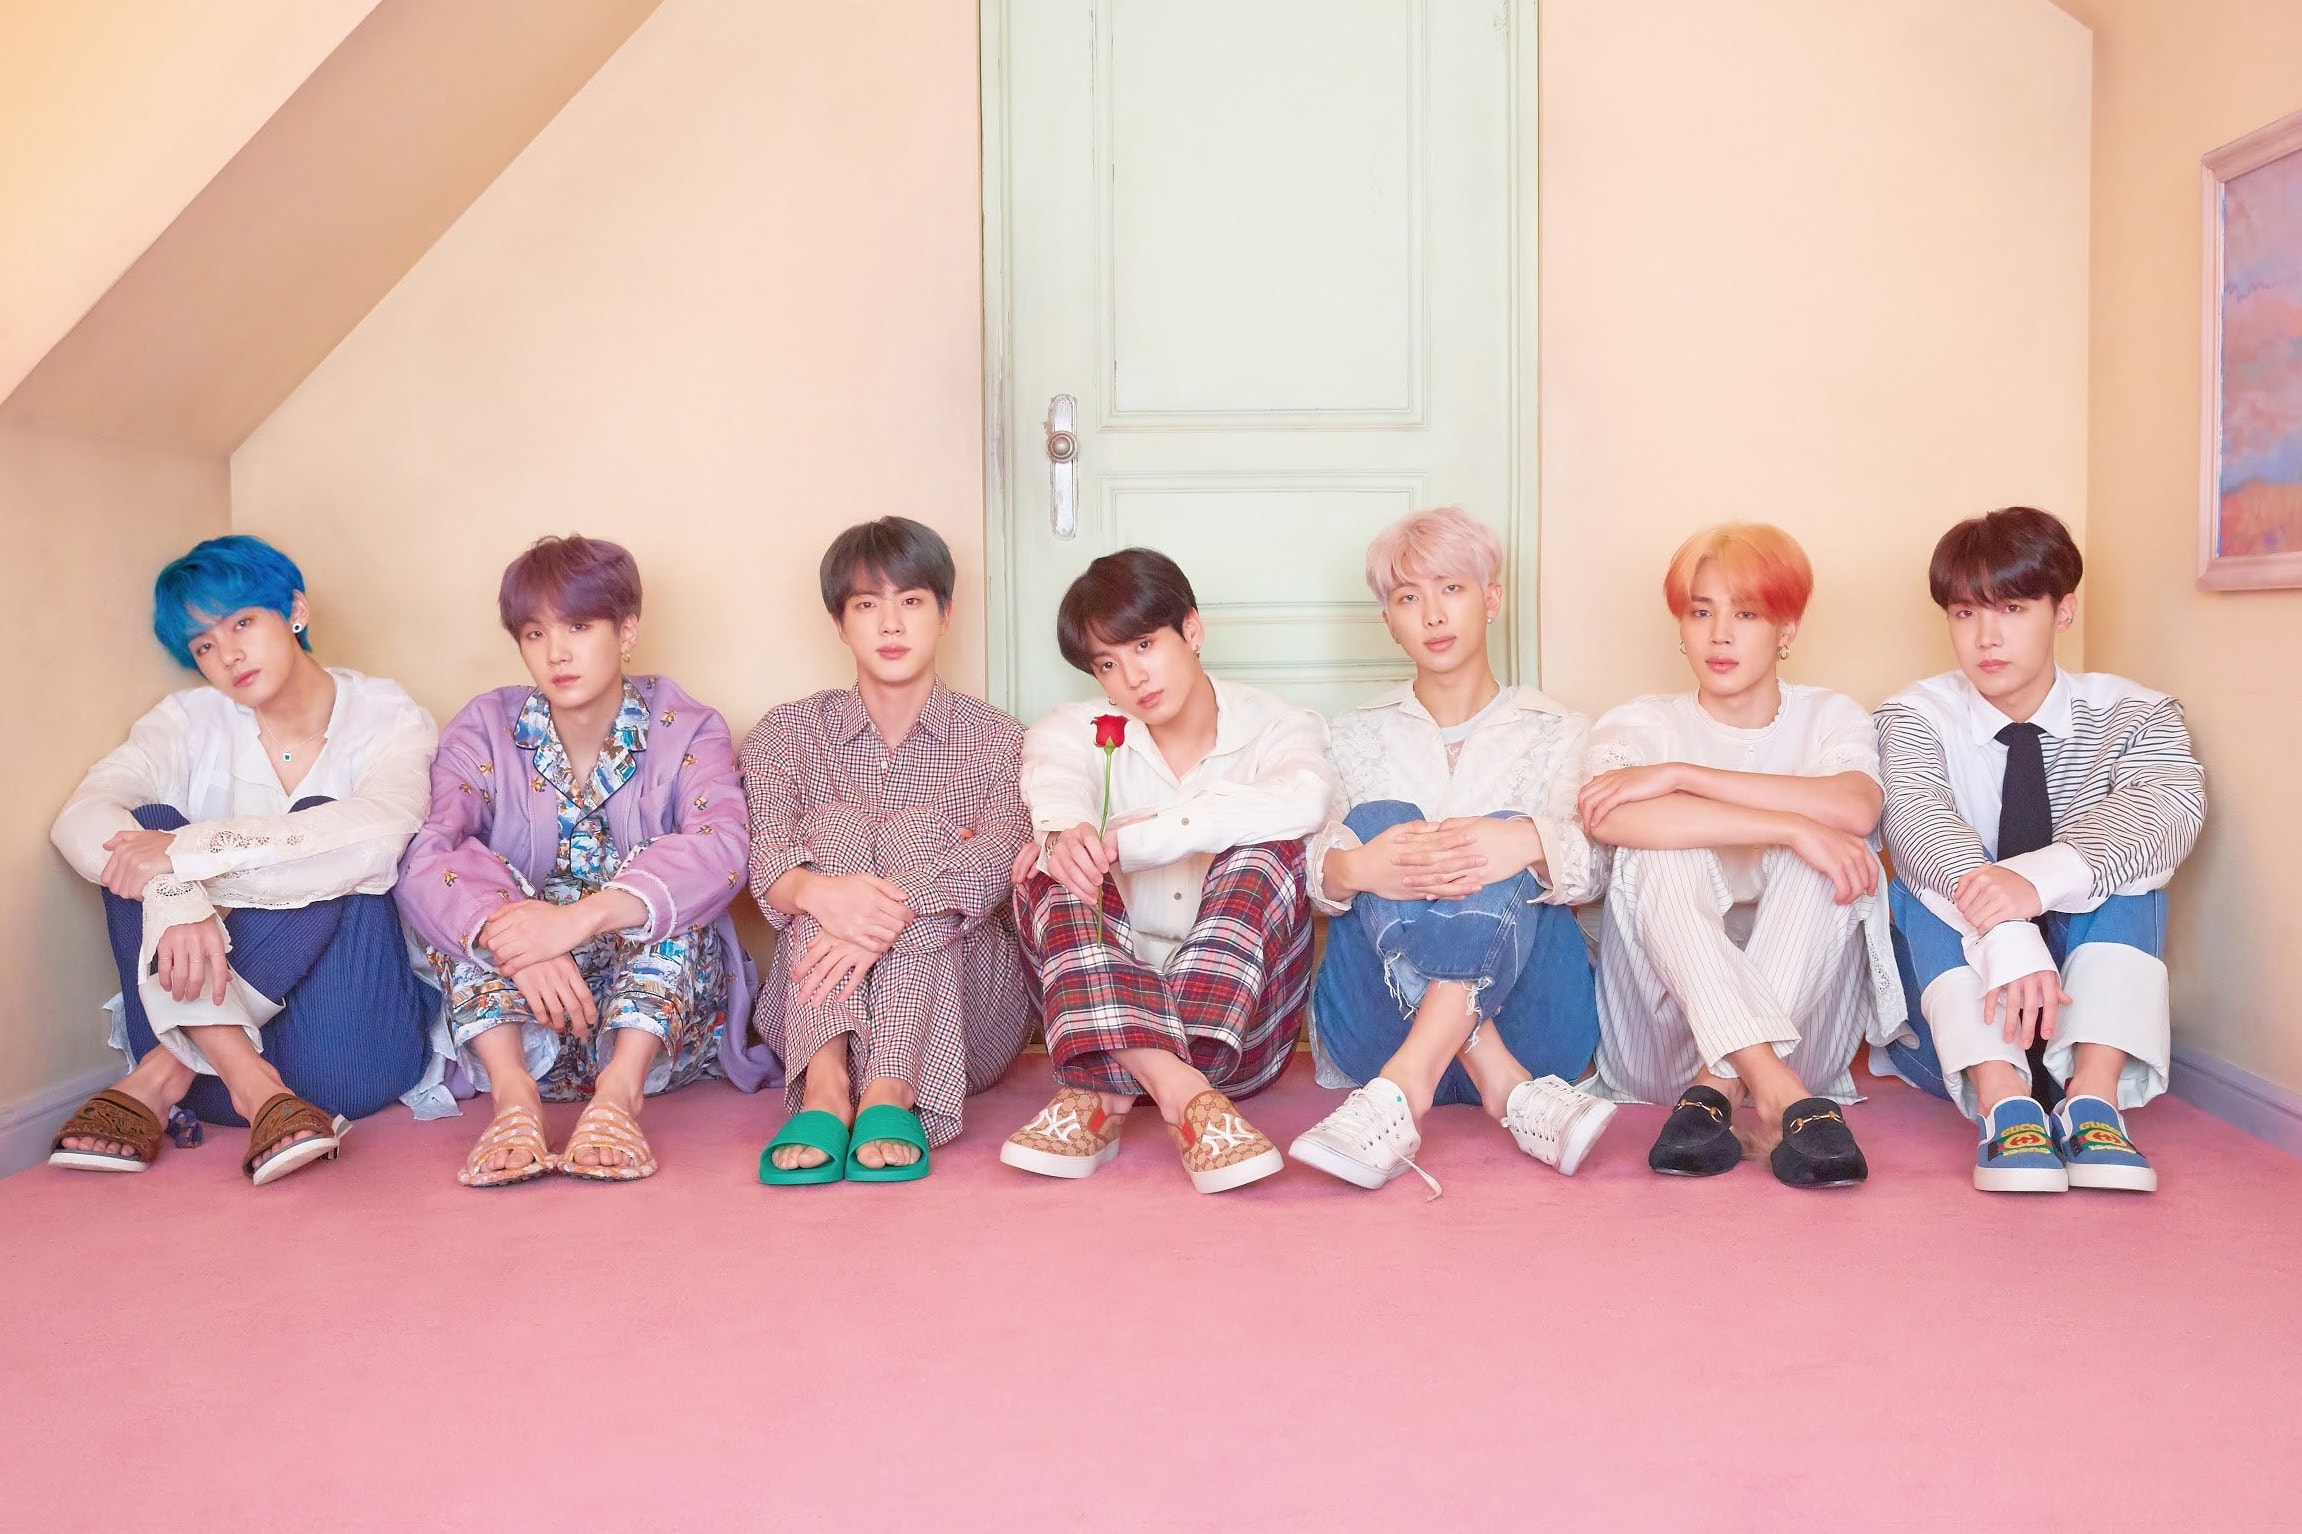 BTS "Map of the Soul: Persona" Album Release Ed Sheeran Halsey Boy With Luv Collaborations